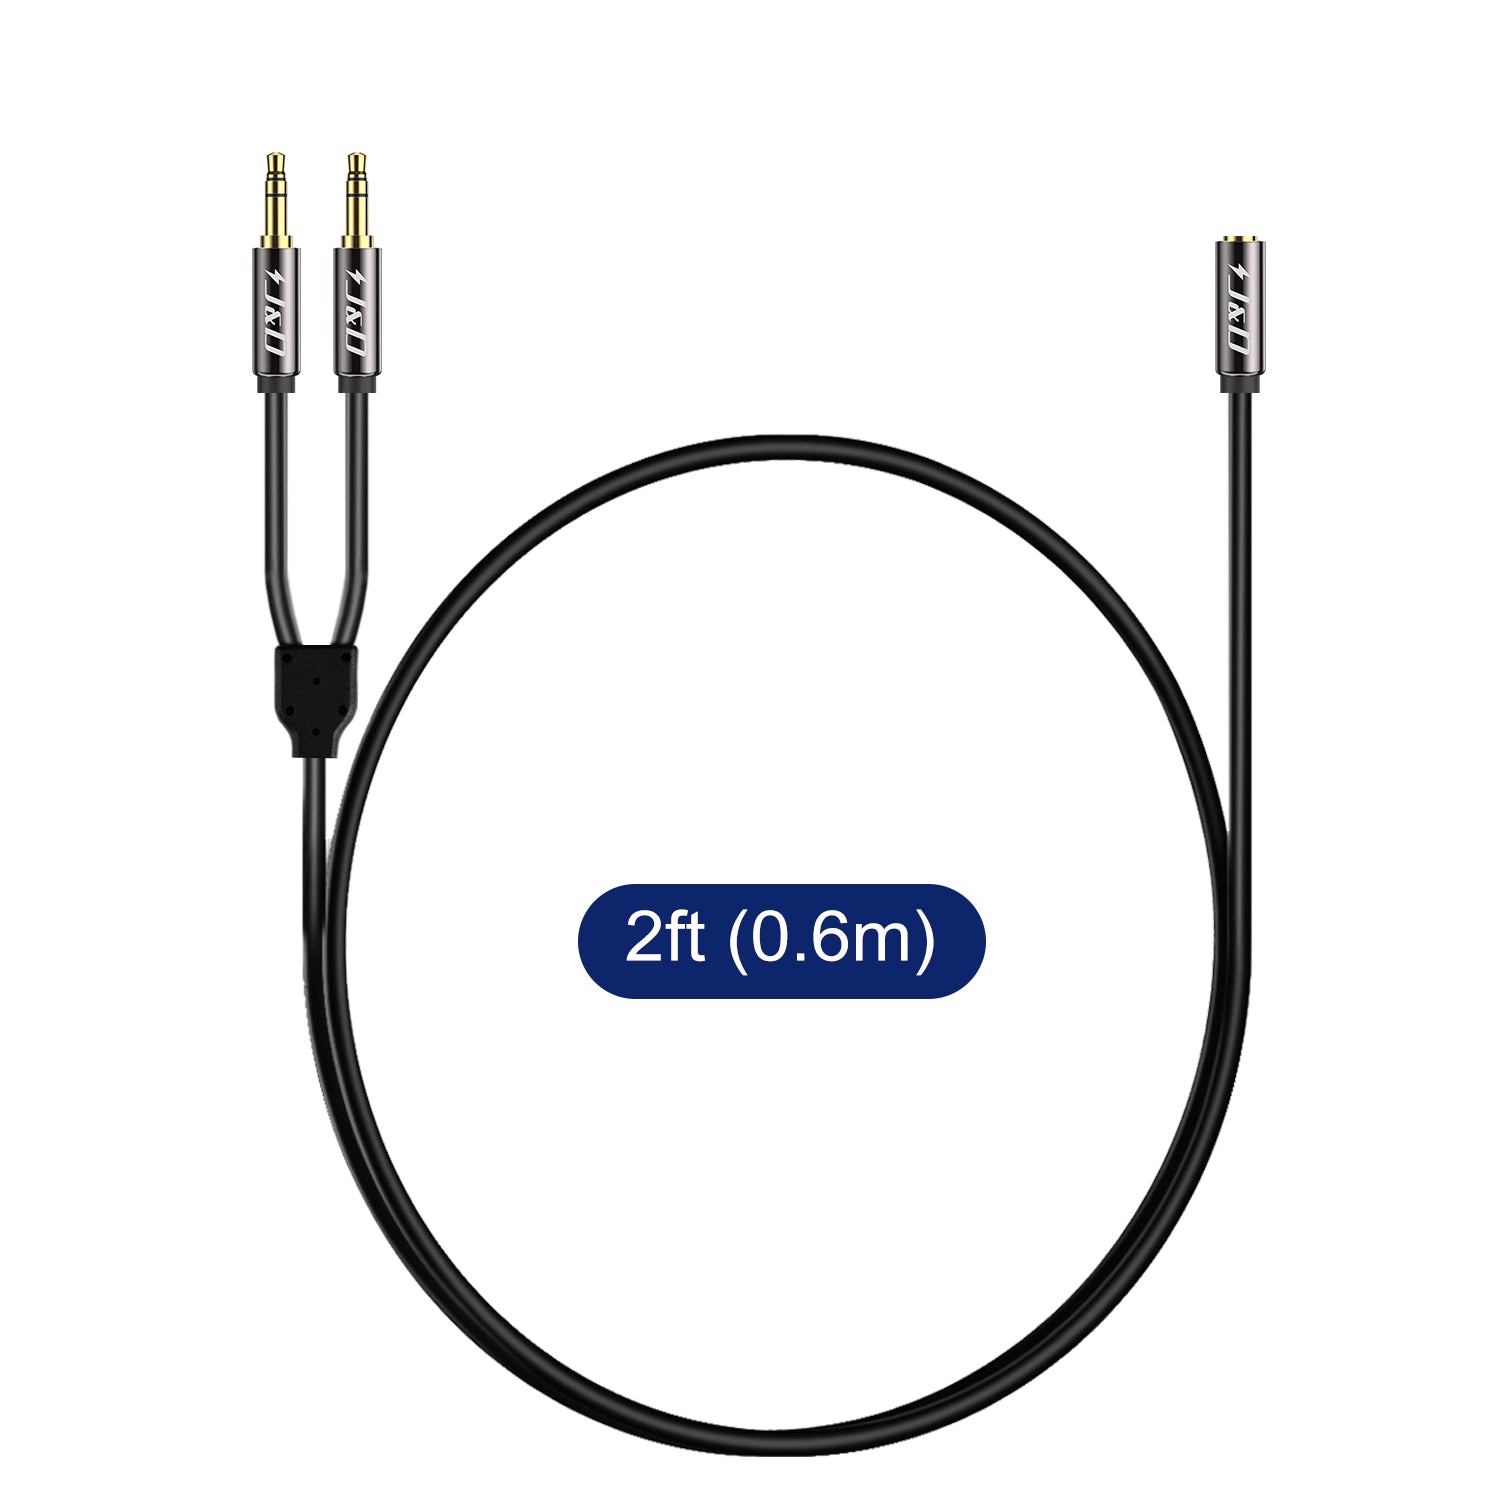 6.35mm Stereo Jack Splitter Audio Cable 1/4inch Plug to 2x Sockets TRS 0.2m  20cm